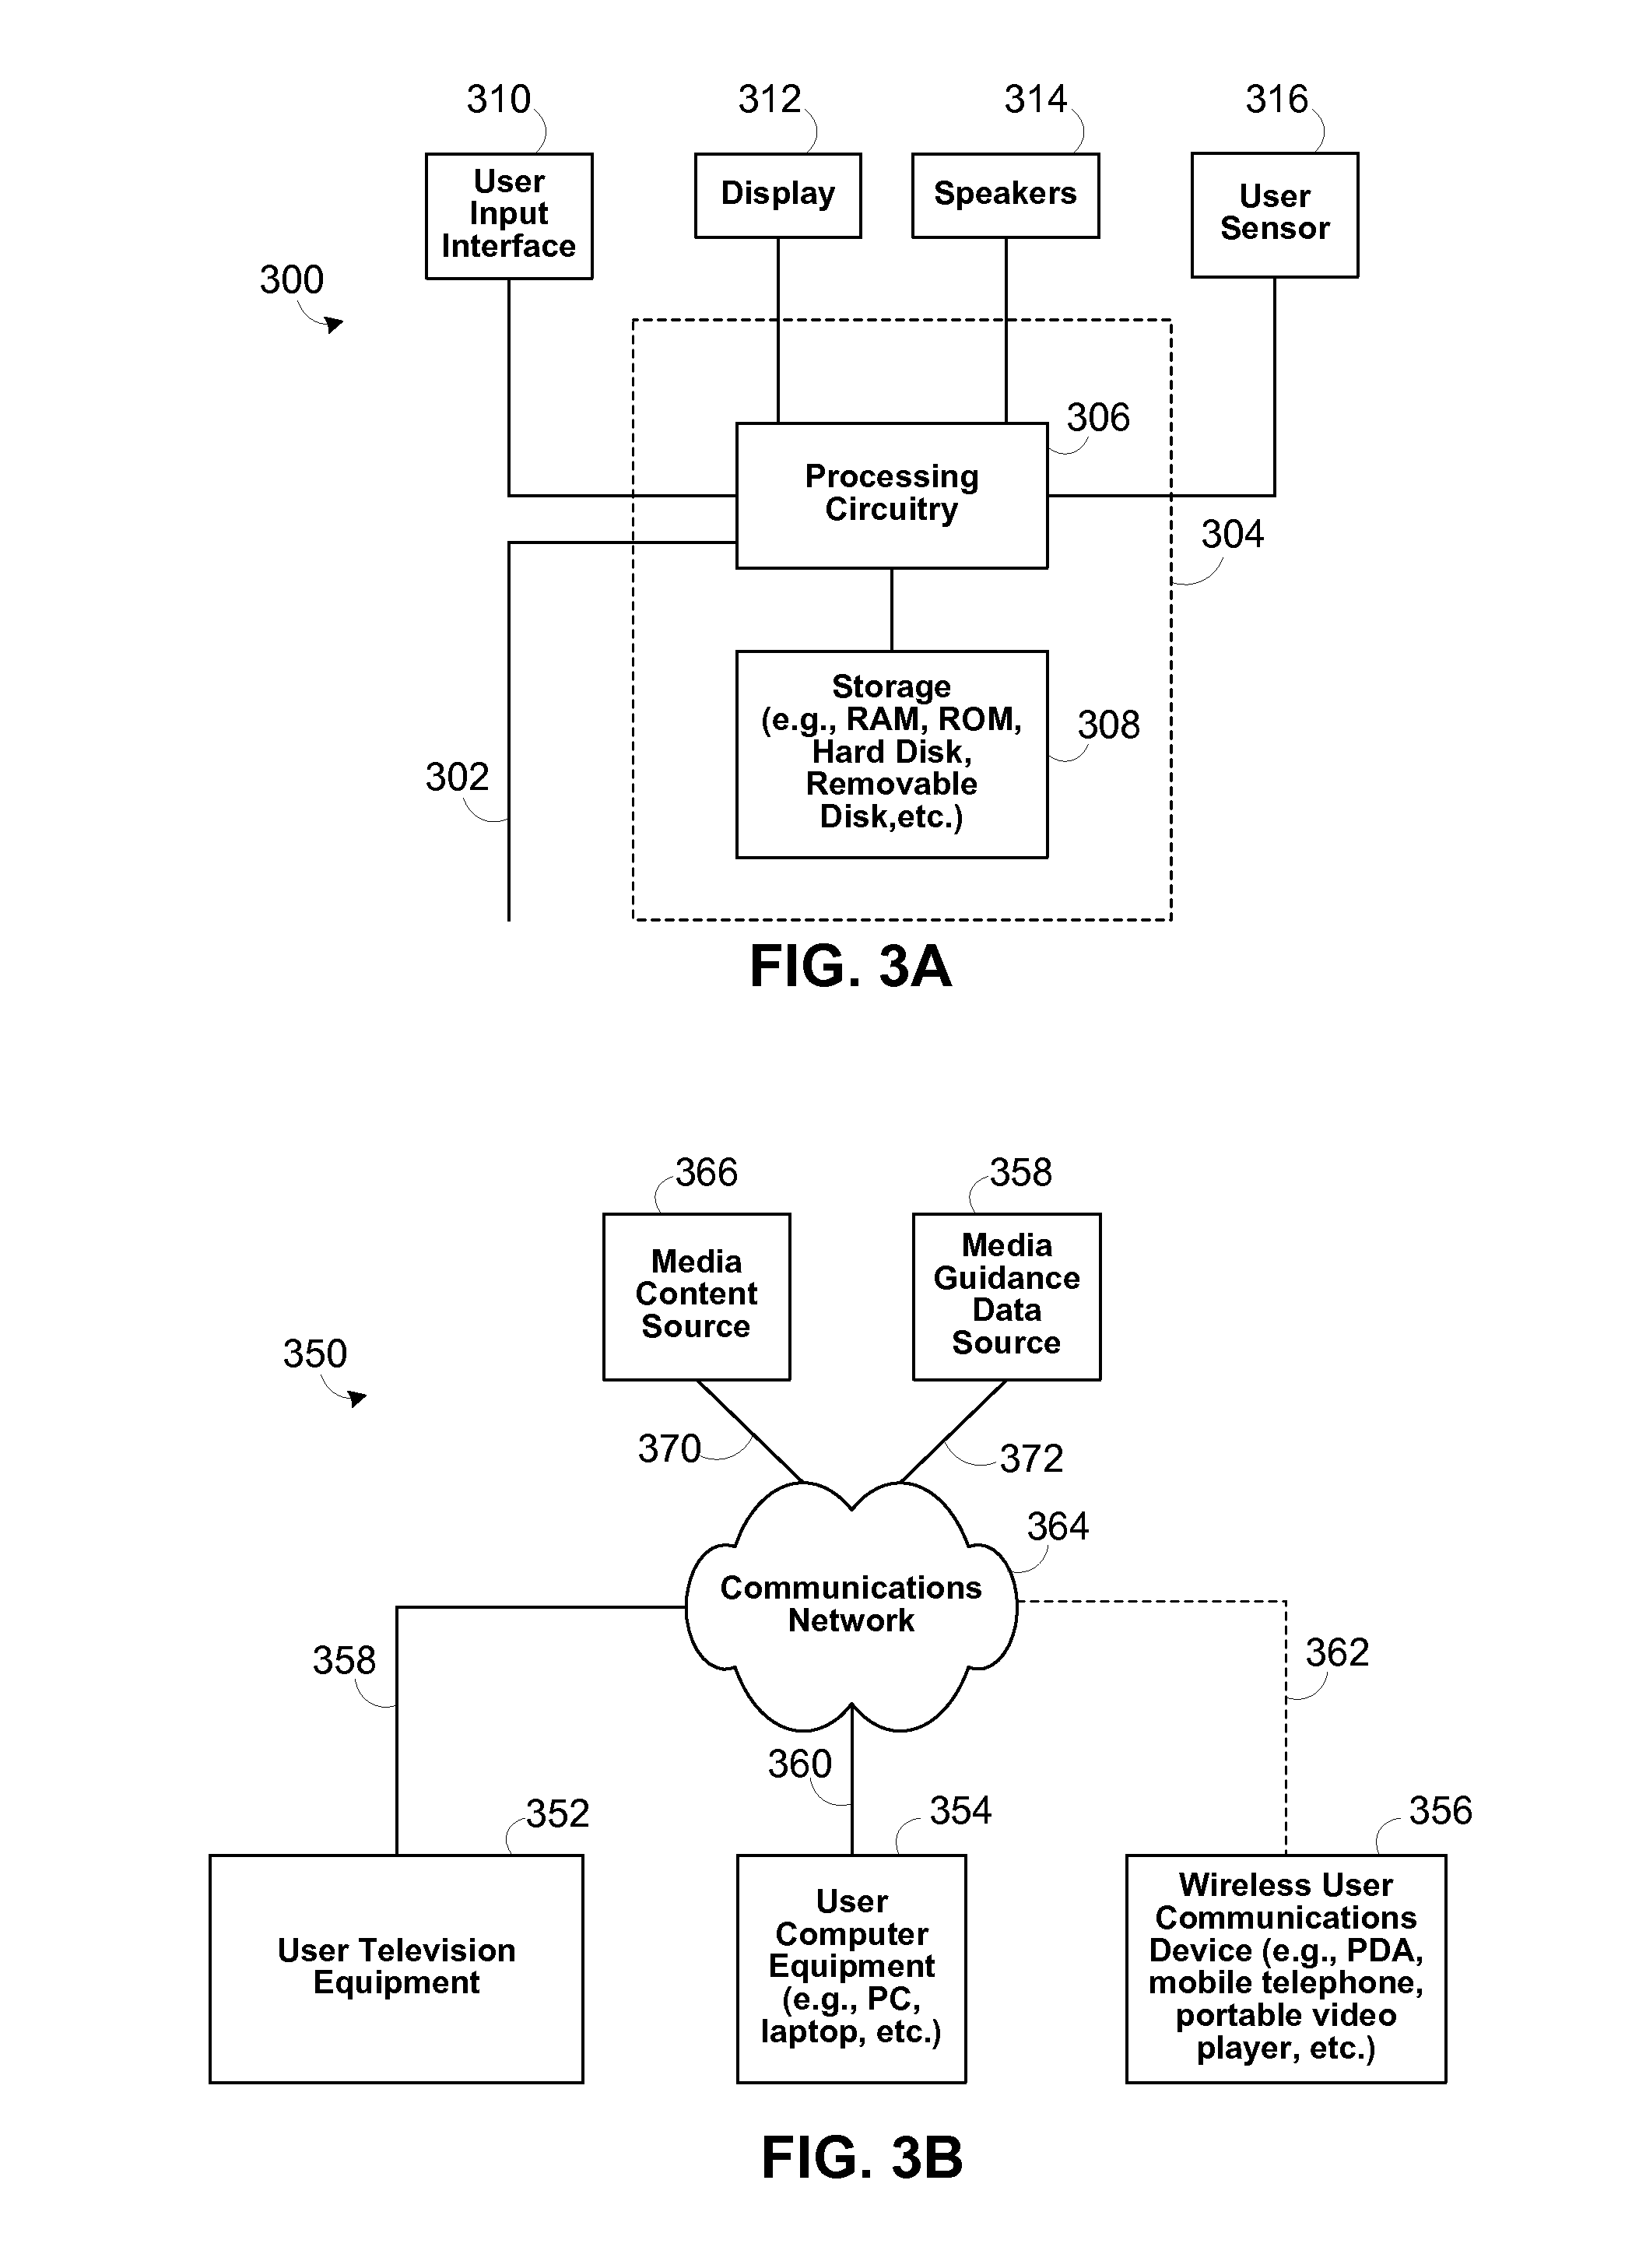 Systems and methods for monitoring motion sensor signals and adjusting interaction modes